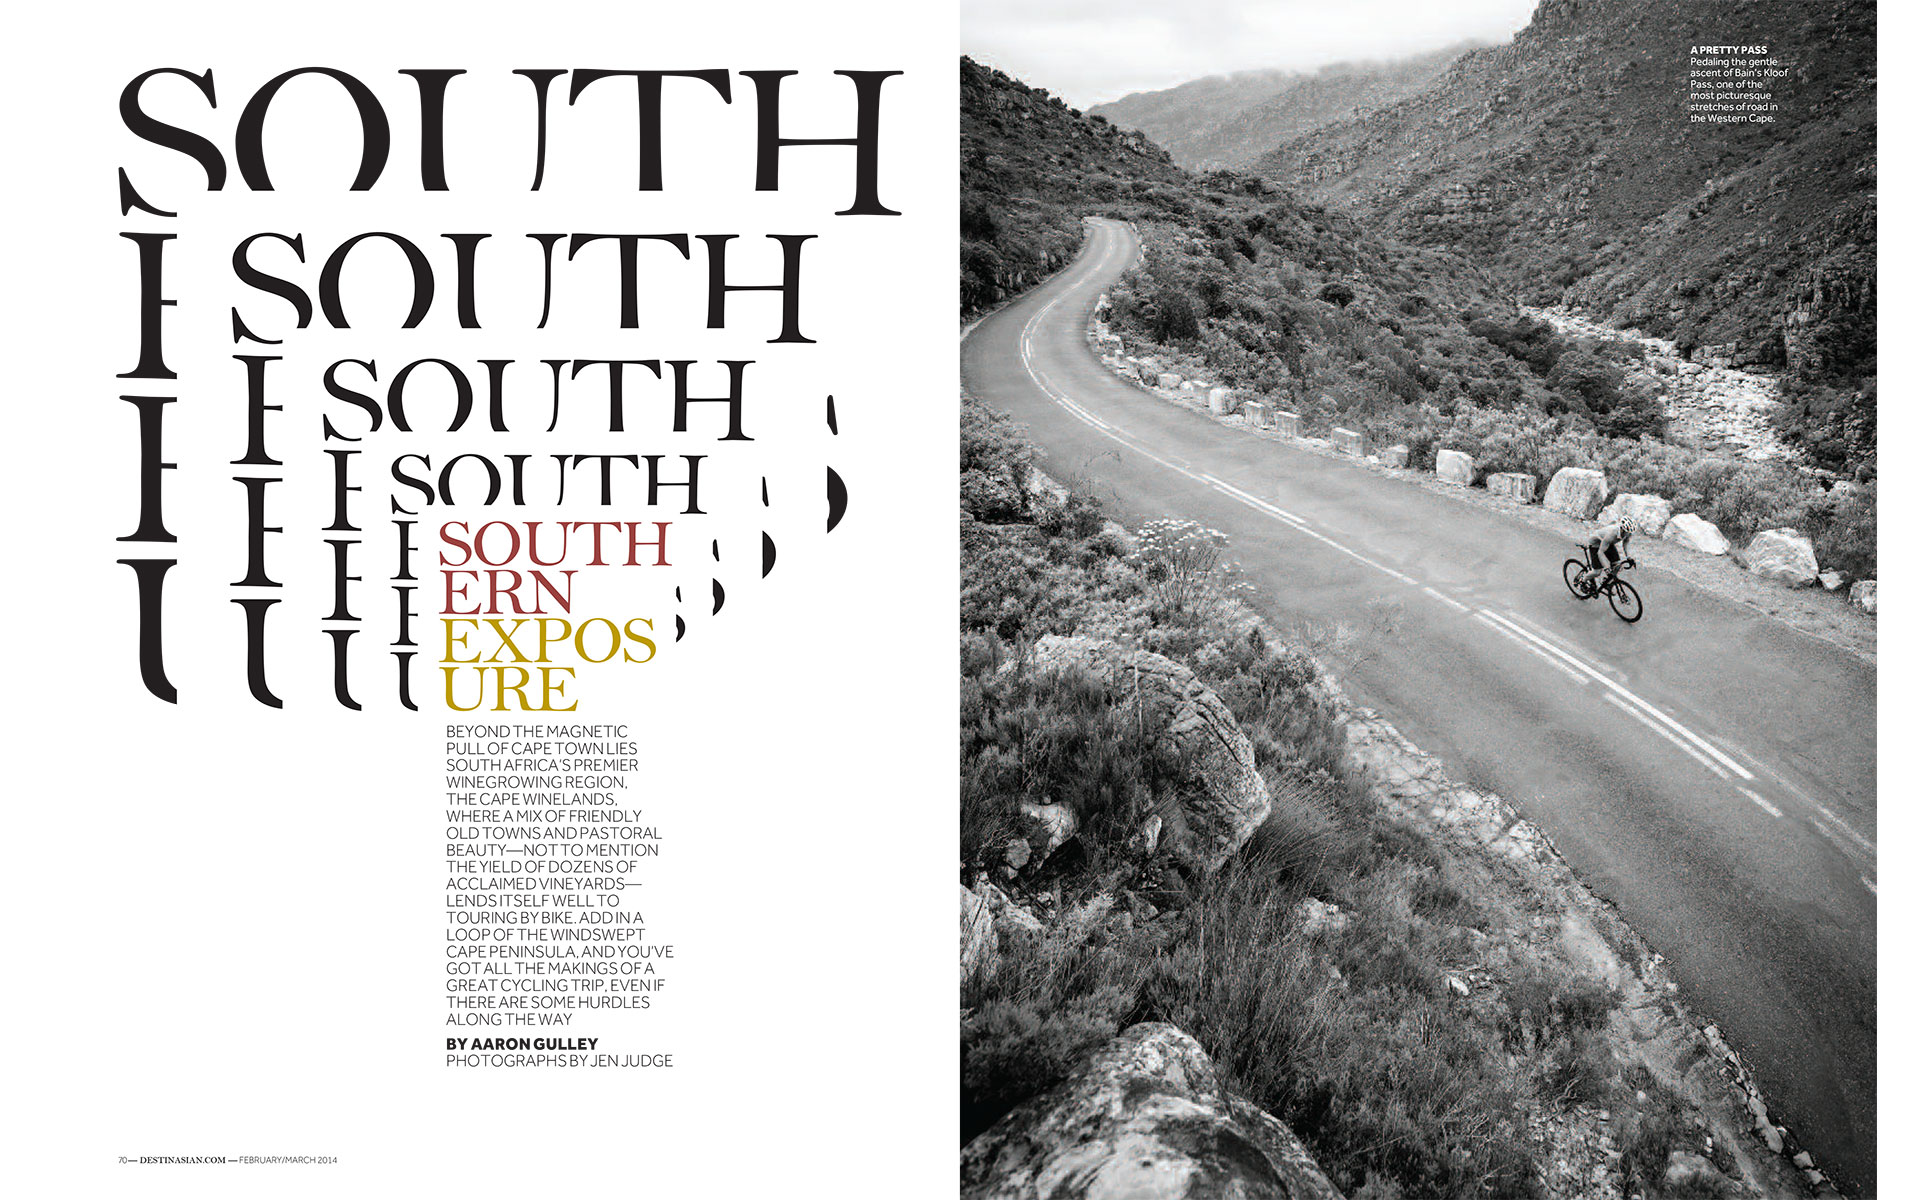 <p style="text-align: center;"><b><font color="2a2871">Southern Exposure, DestinAsian, February 2014</font></b>
</p>
Beyond the magnetic pull of Cape Town lies South Africa's winegrowing region. The Cape Winelands, where a mix of friendly old towns and pastoral beauty--not to mention the yield of dozens of acclaimed vineyards--lends itself well to touring by bike. Add in a loop of windswept Cape Peninsula, and you've got all the makings of a great cycling trip, even if there are some hurdles along the way.

<p style="text-align: center;"><a href="/users/AaronGulley18670/DA_RSA_3-14.pdf" onclick="window.open(this.href, '', 'resizable=no,status=no,location=no,toolbar=no,menubar=no,fullscreen=no,scrollbars=no,dependent=no,width=900'); return false;">Read the Story</a></p>